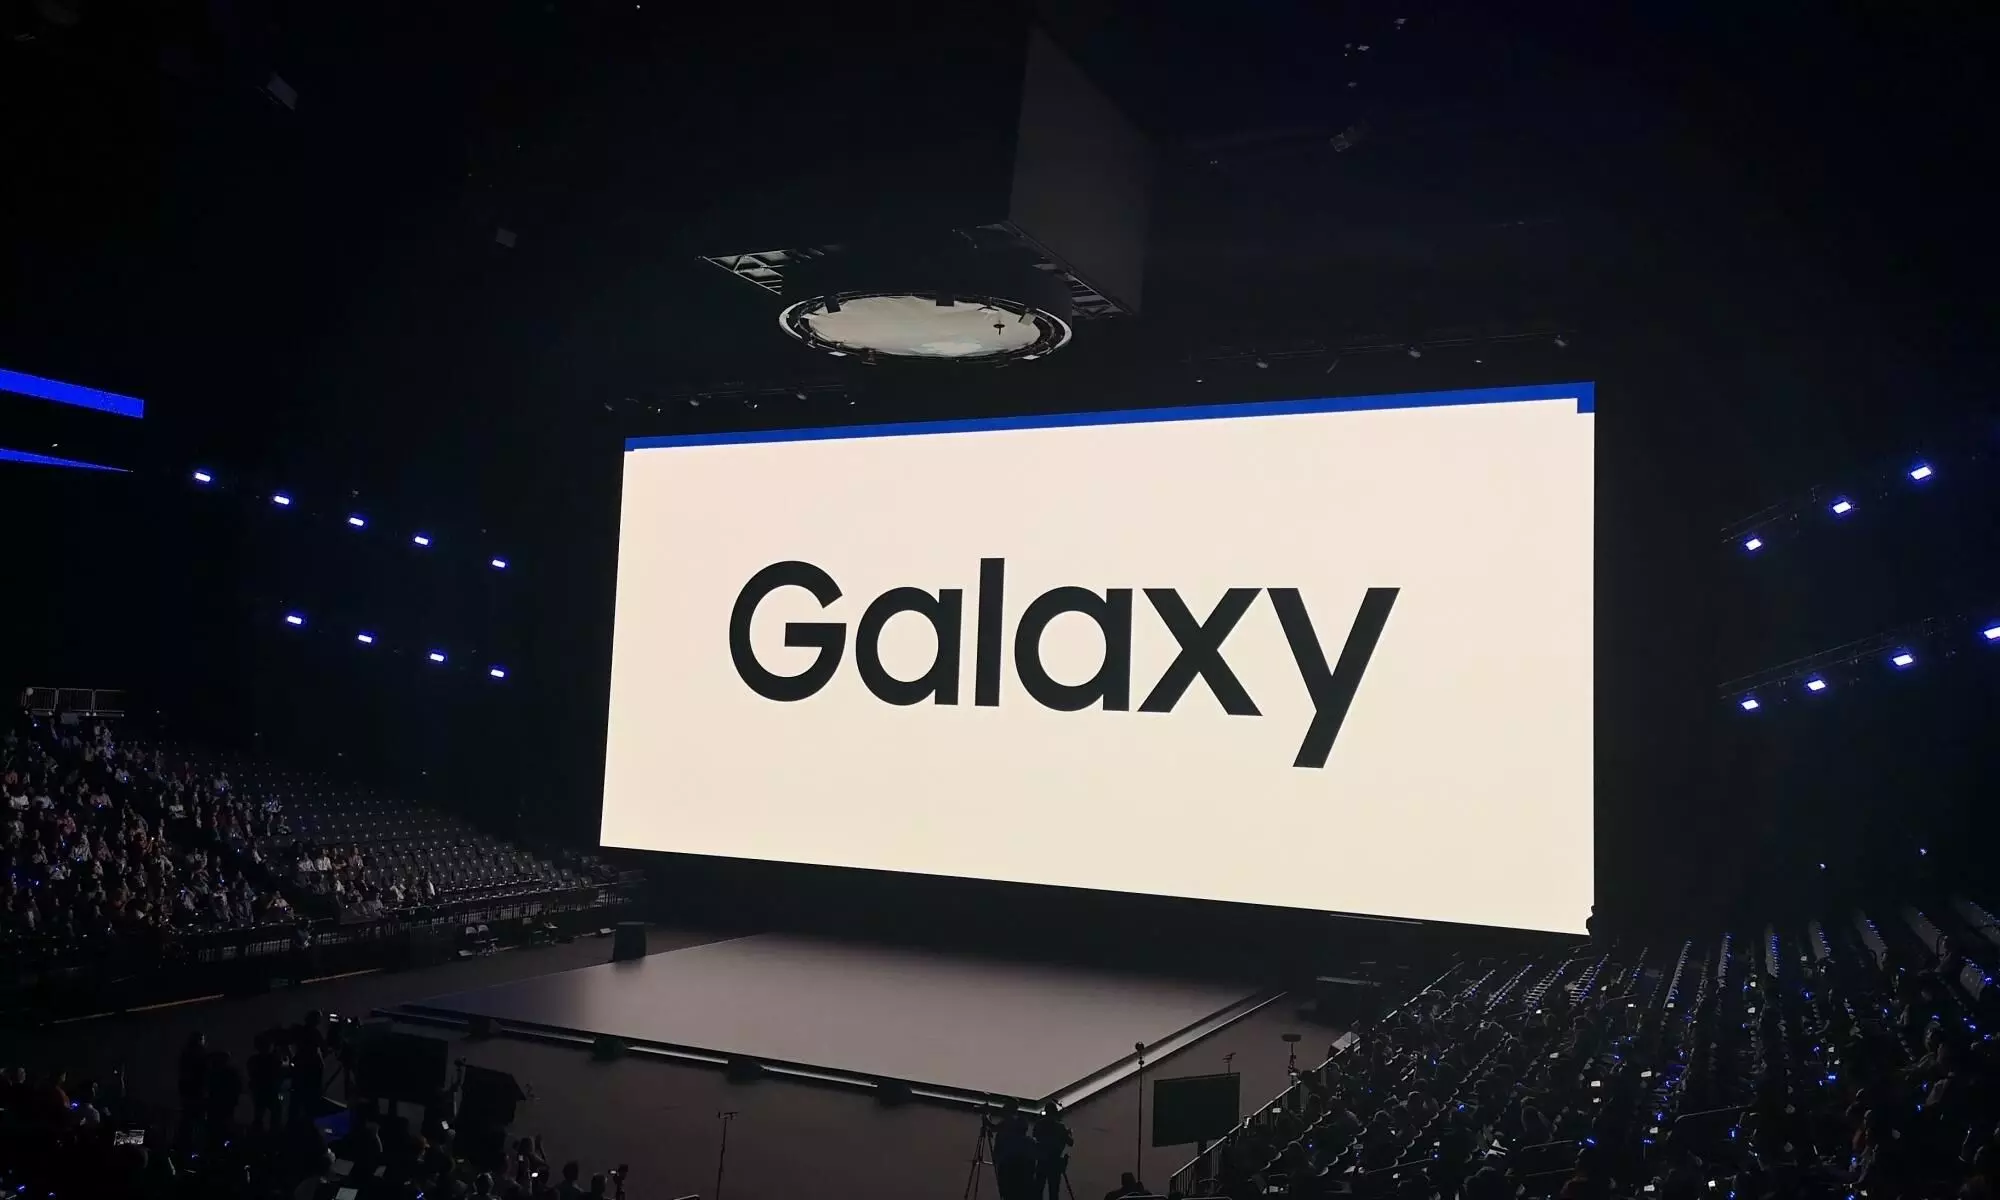 Next TWS earphones from Samsung may be called Galaxy Buds Pro